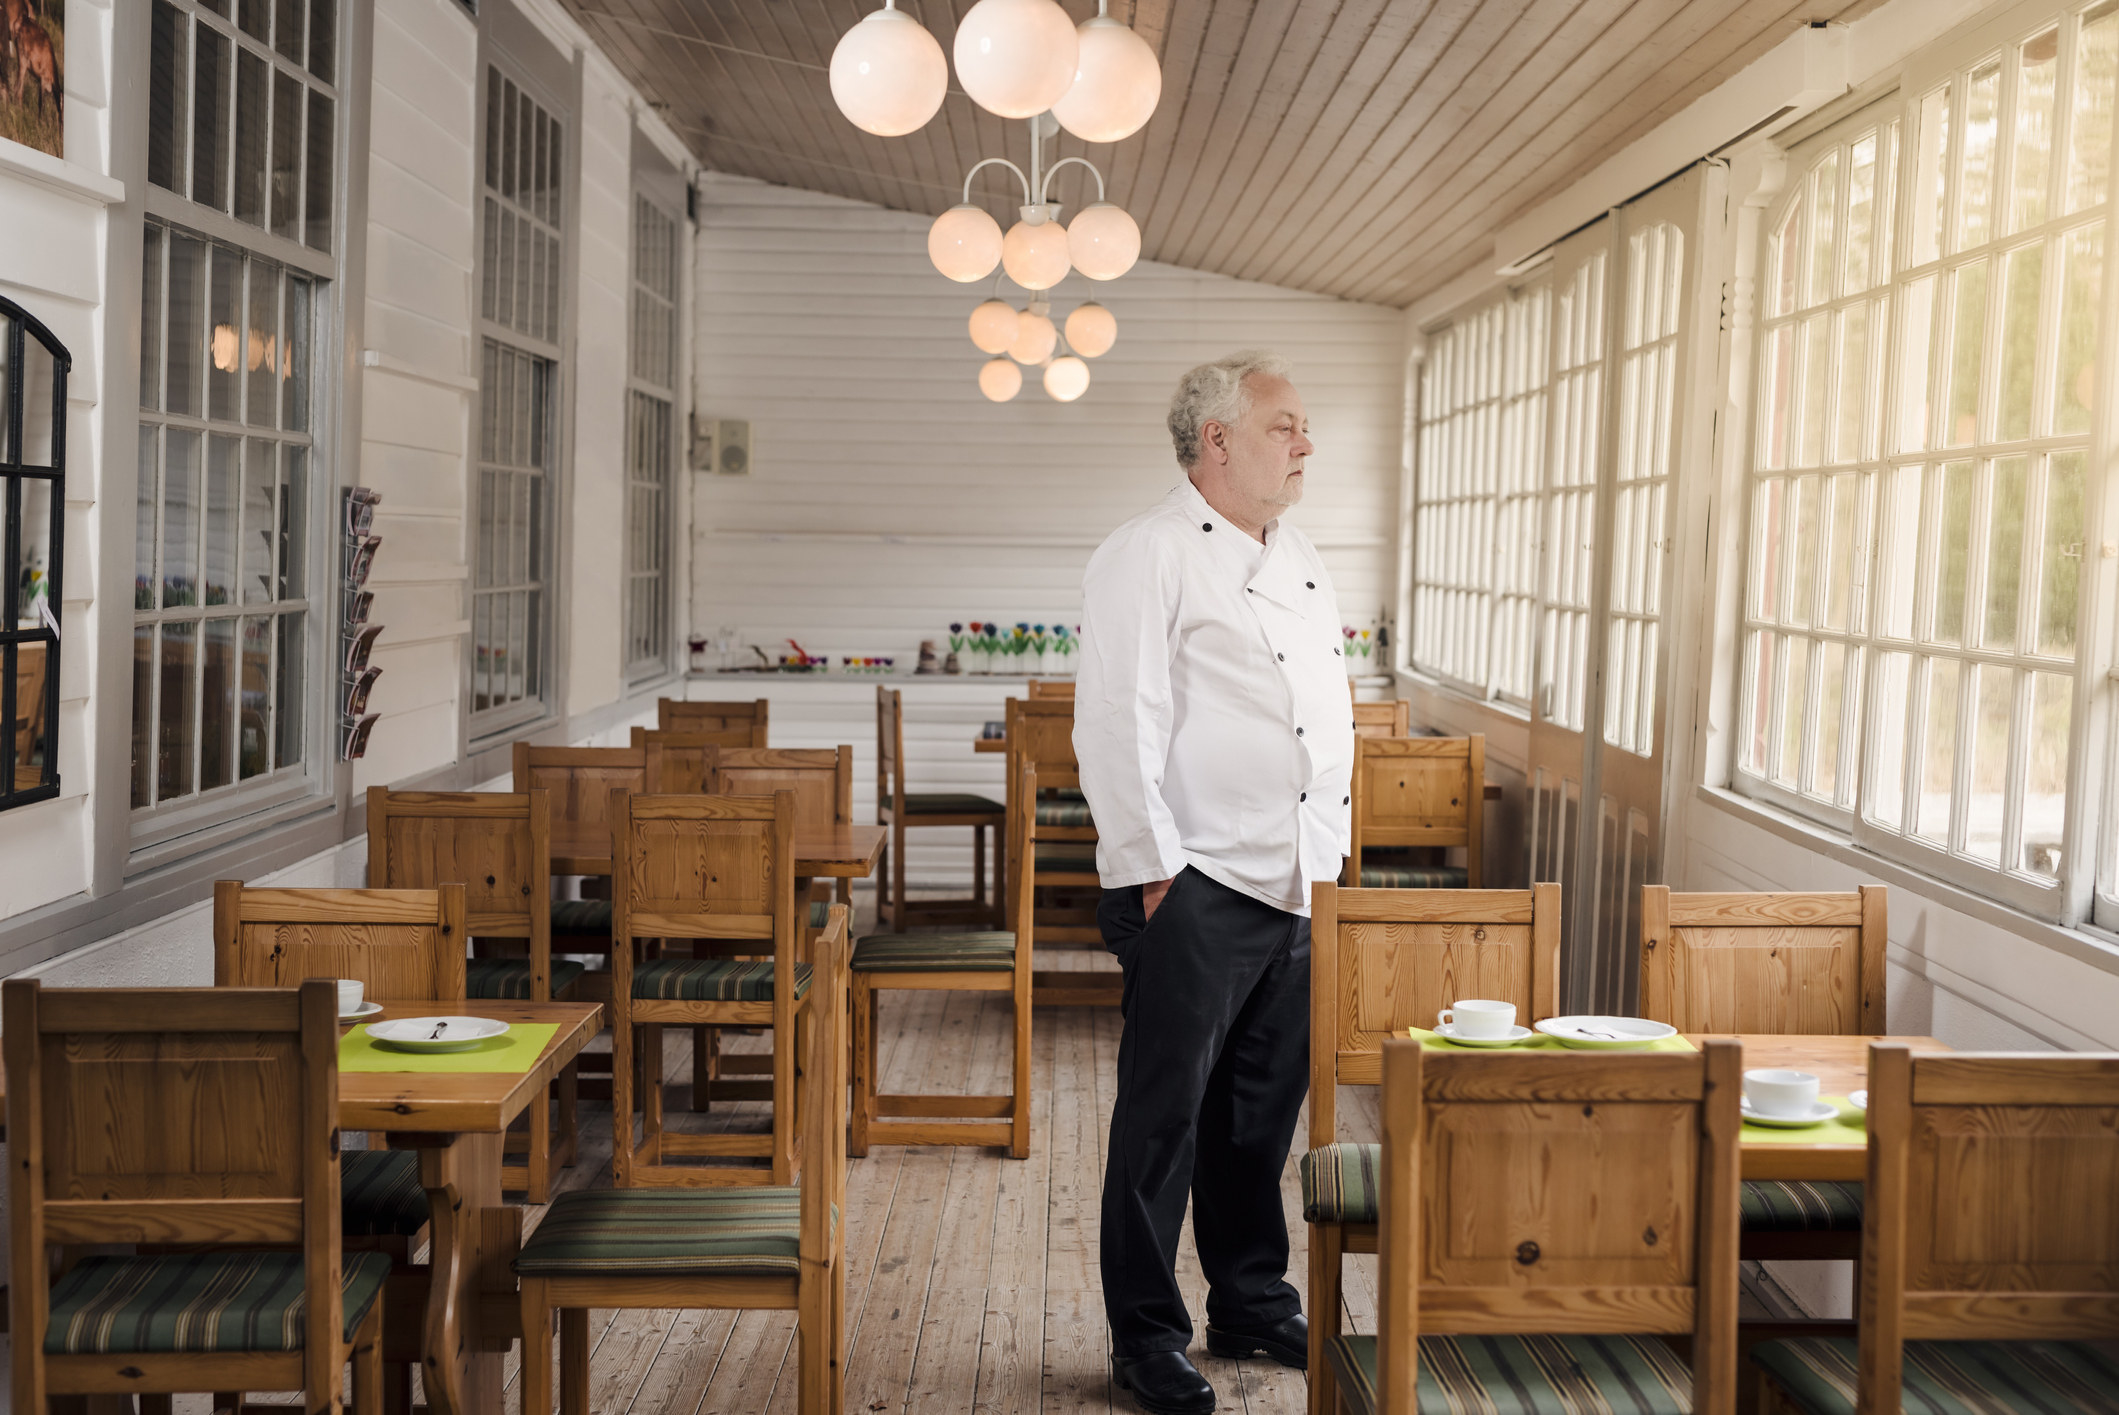 A man in a chef&#x27;s uniform stands in an empty, rustic dining area with wooden chairs and tables, looking out the window